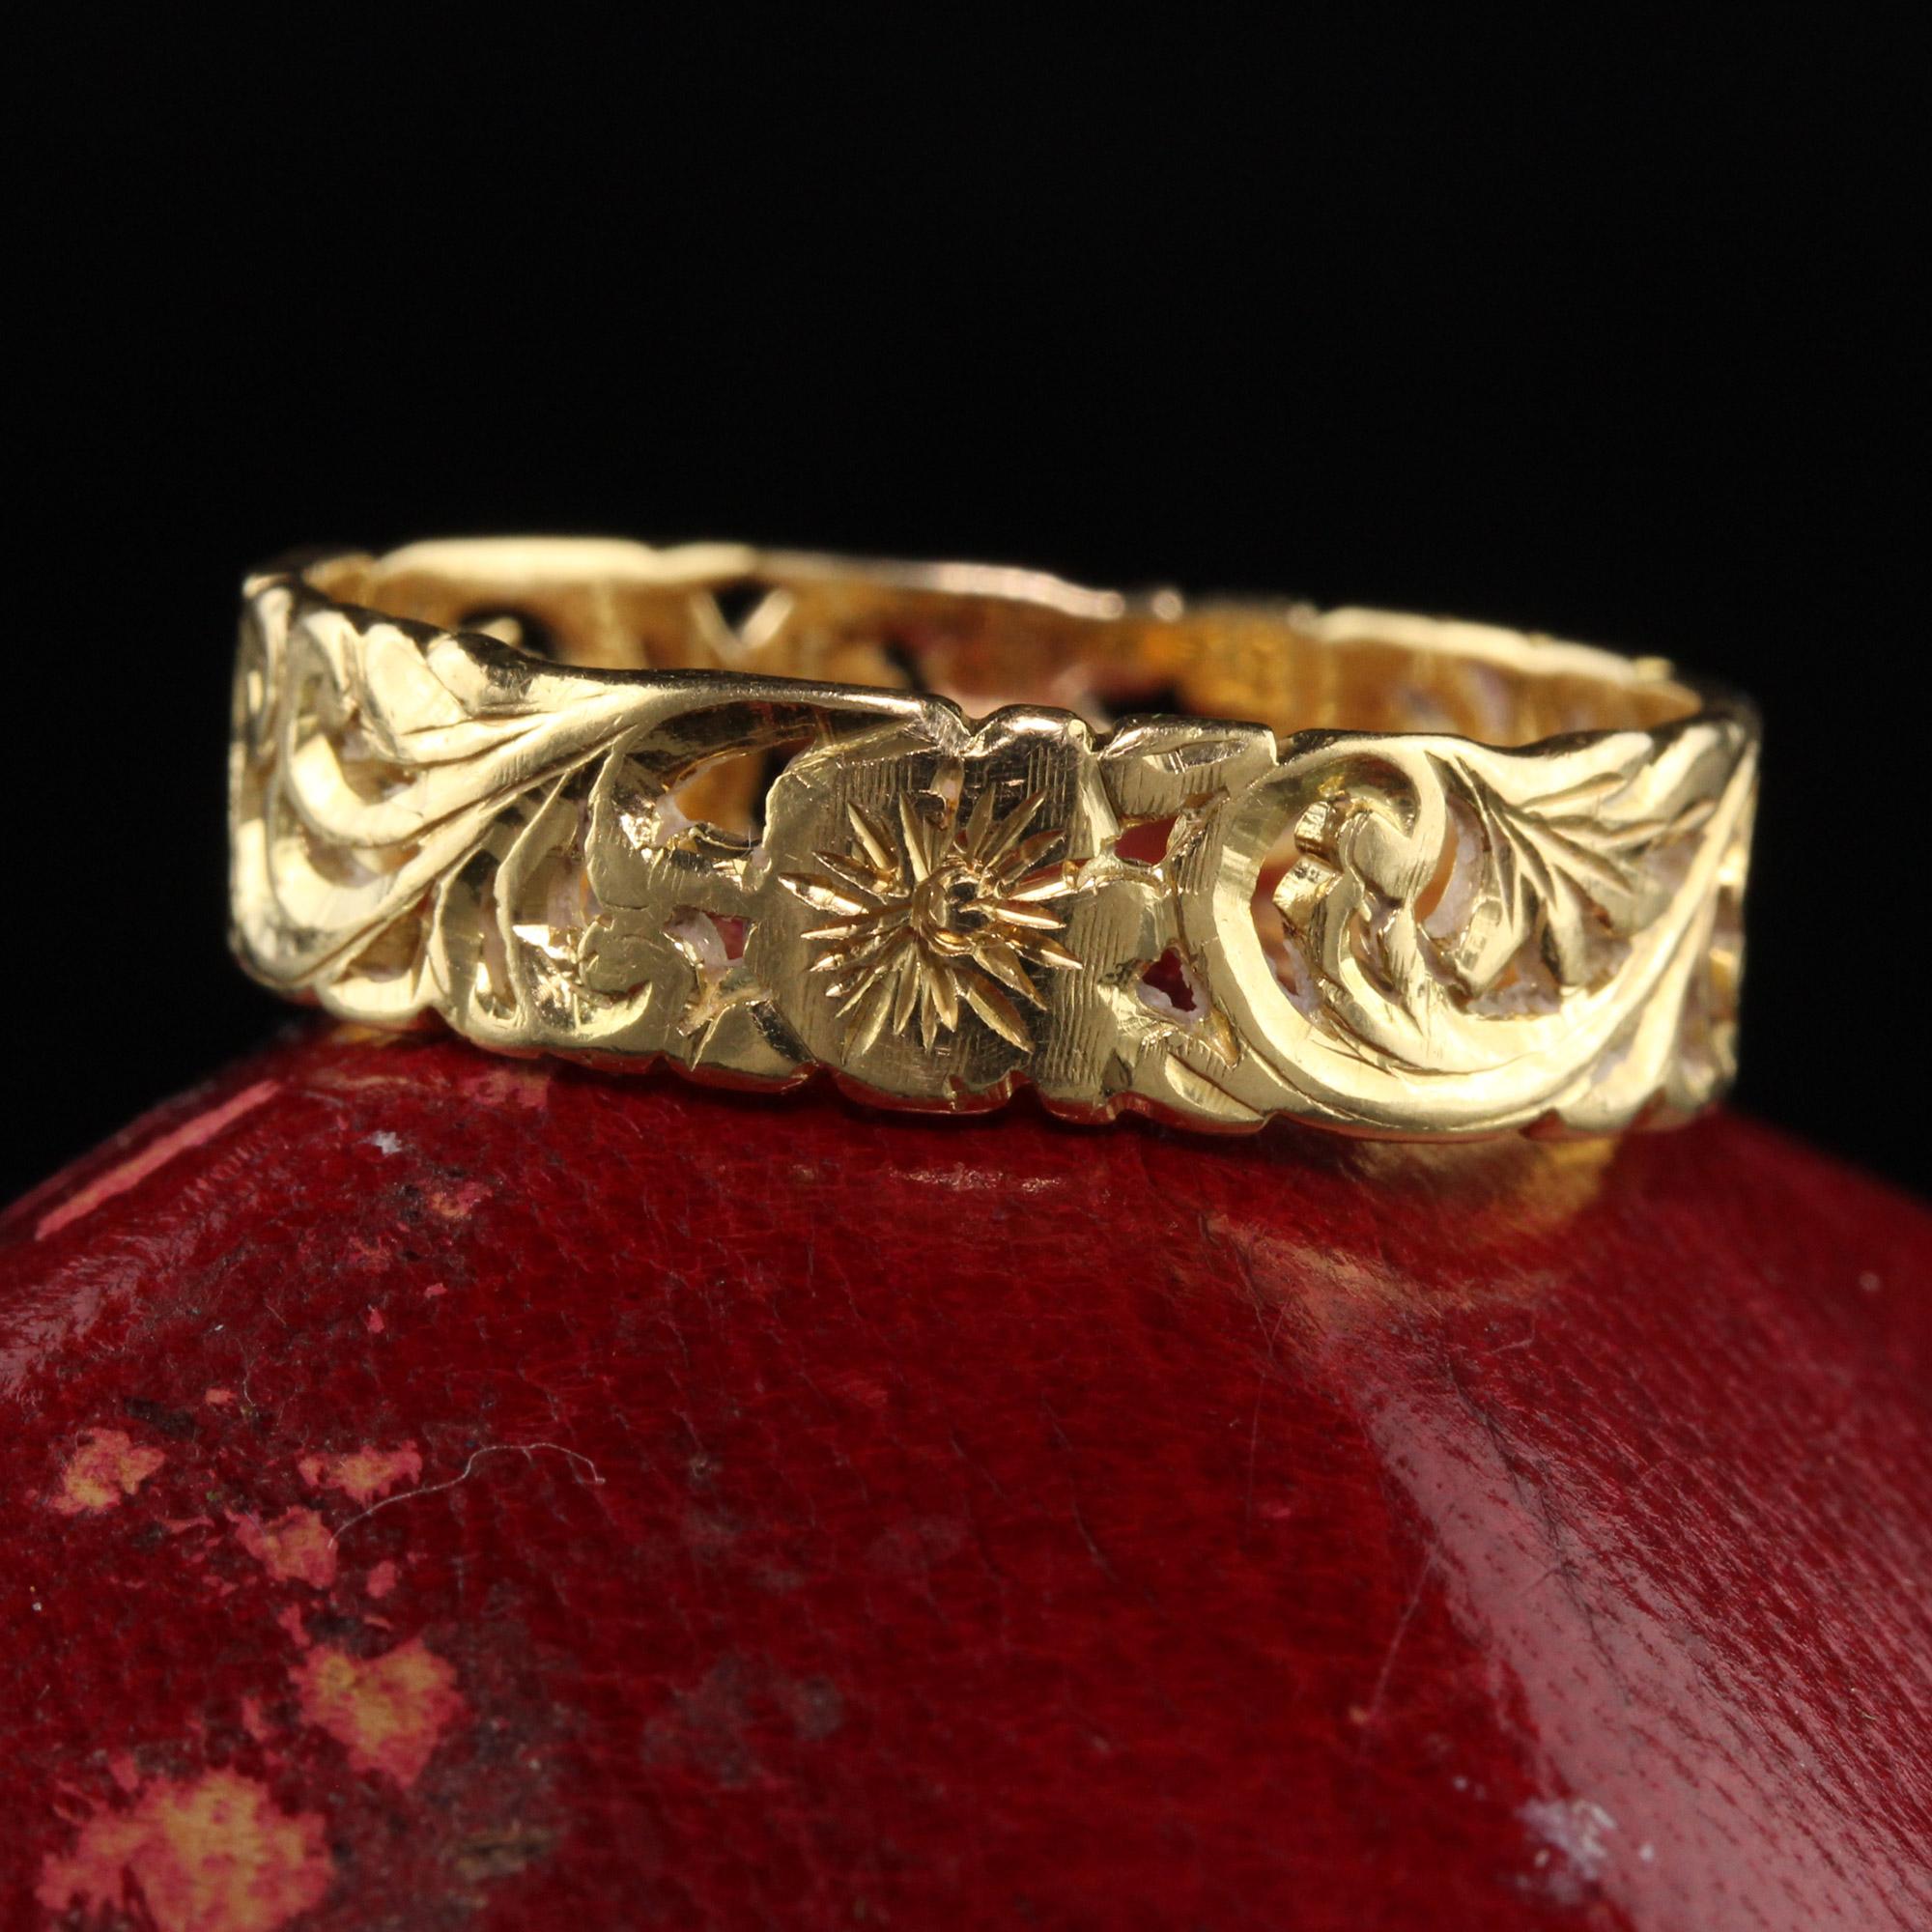 Beautiful Estate Vintage 18K Yellow Gold Floral Engraved Wedding Band. This beautiful band has open gold work one it as well as gorgeous floral engravings going around the entire ring.

Item #R1020

Metal: 18K Yellow Gold

Weight: 4.9 Grams

Ring